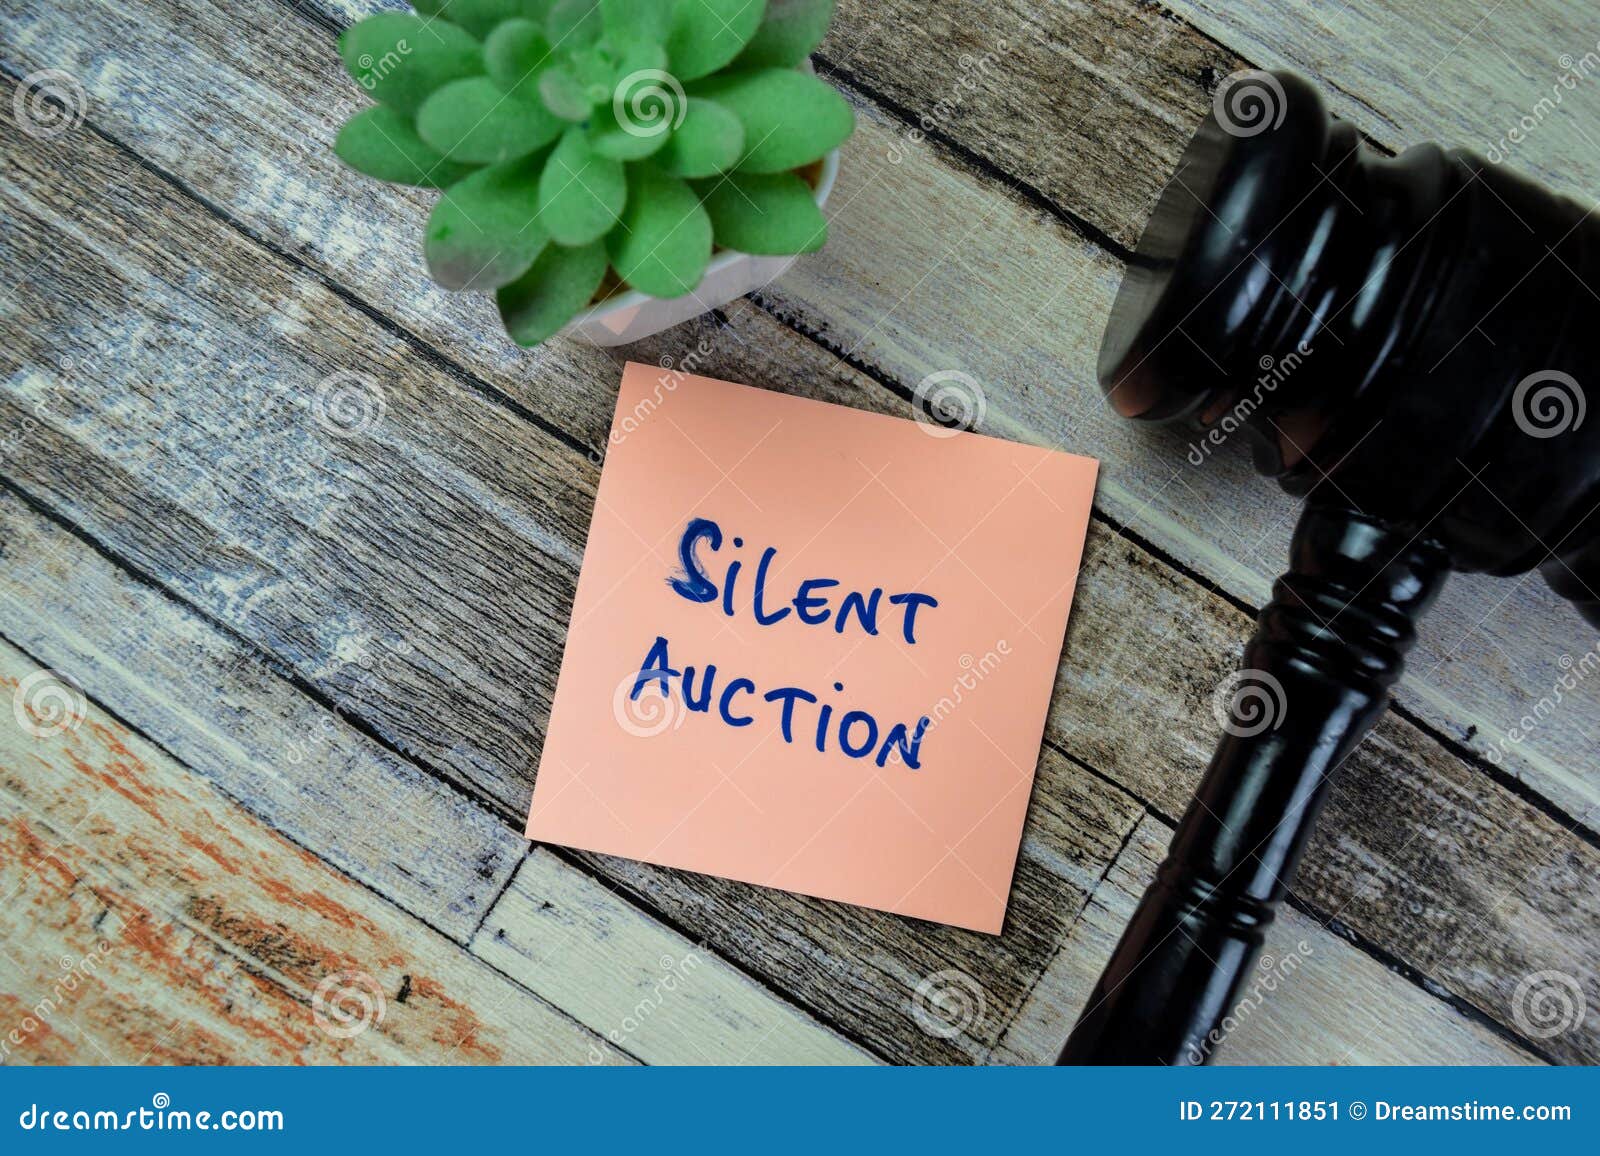 concept of silent auction write on sticky notes with gavel  on wooden table